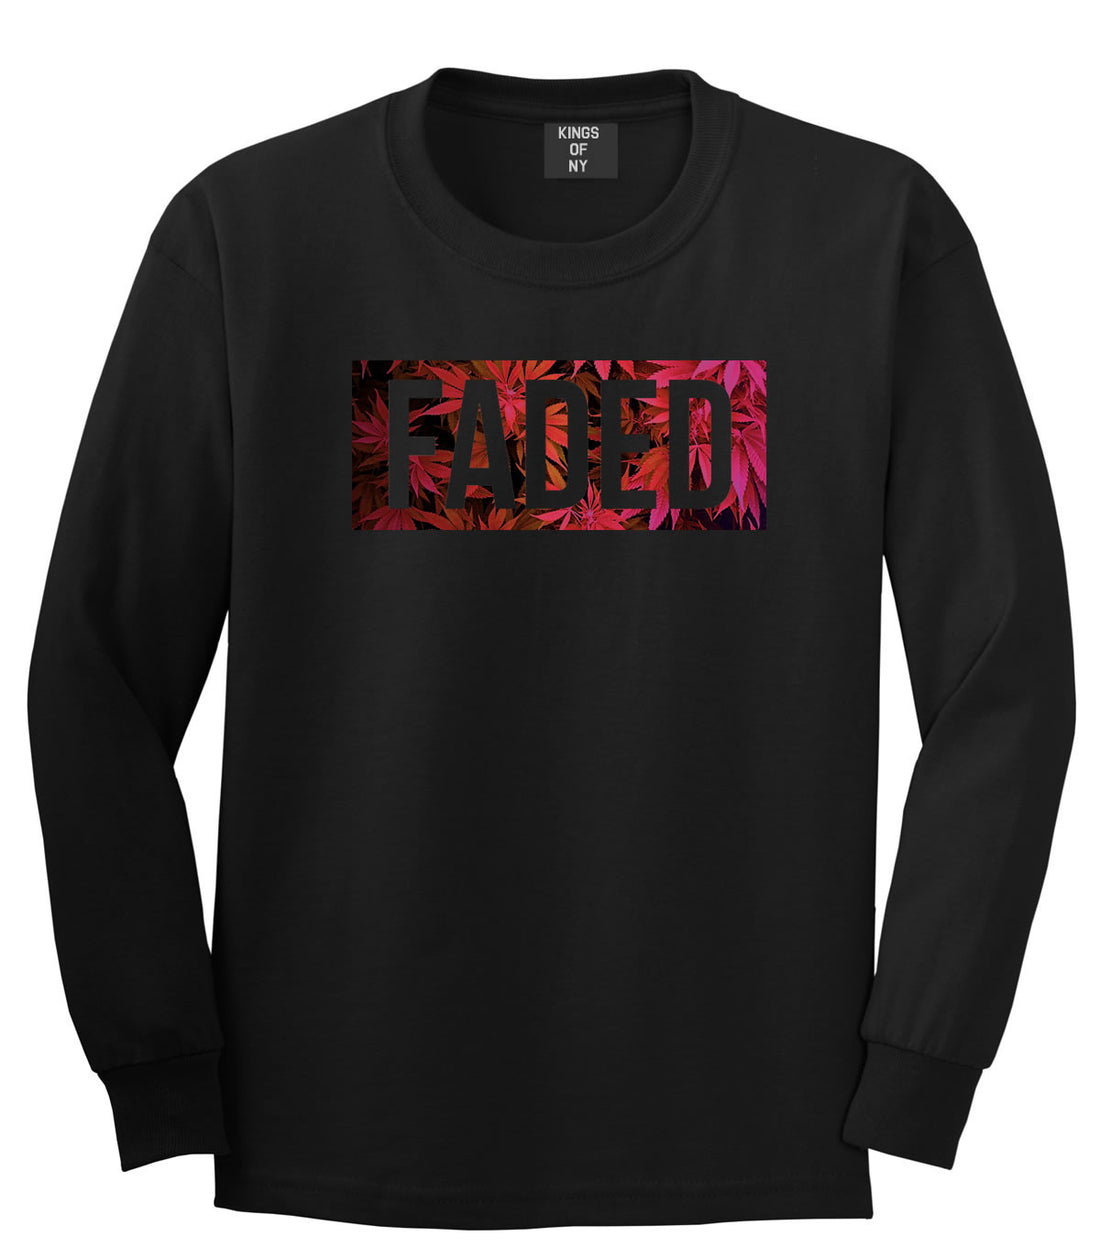 Faded Red and Pink Marijuana Weed Boys Kids Long Sleeve T-Shirt in Black by Kings Of NY